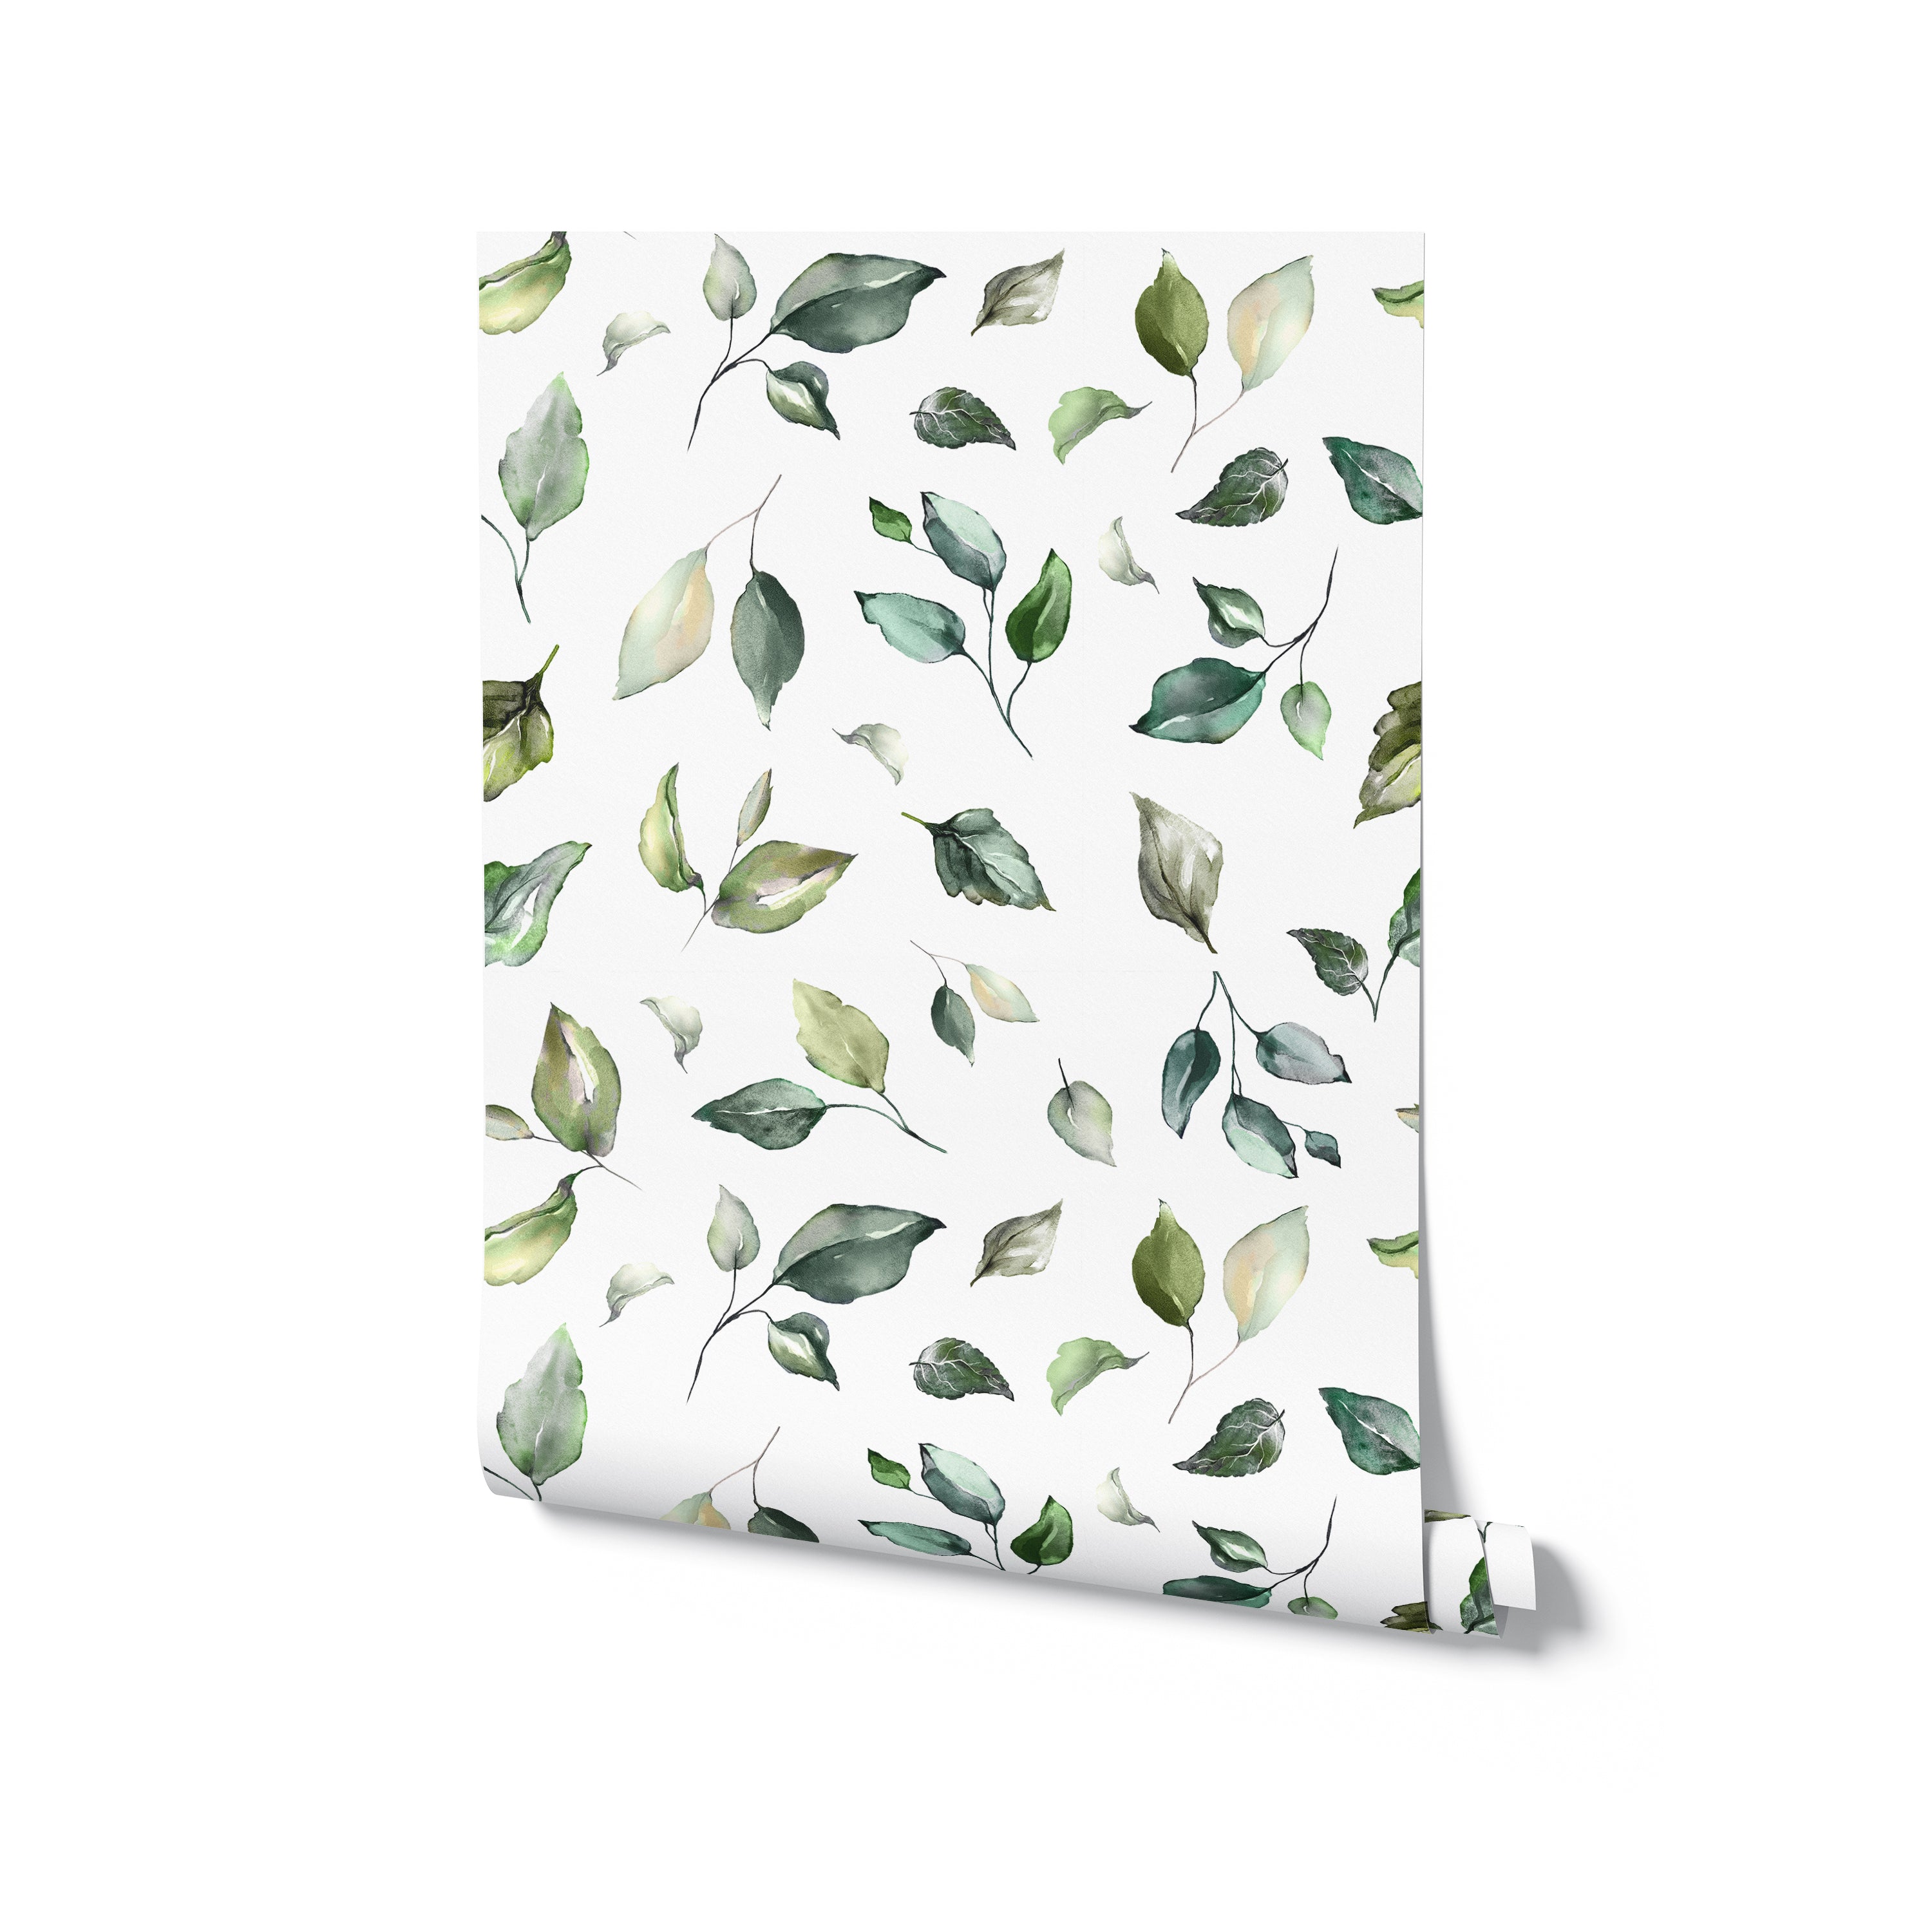 A roll of Sunny Watercolour Floral wallpaper displaying a scattering of watercolour leaves in soft green and beige tones, creating a fresh and soothing natural look on a white background.